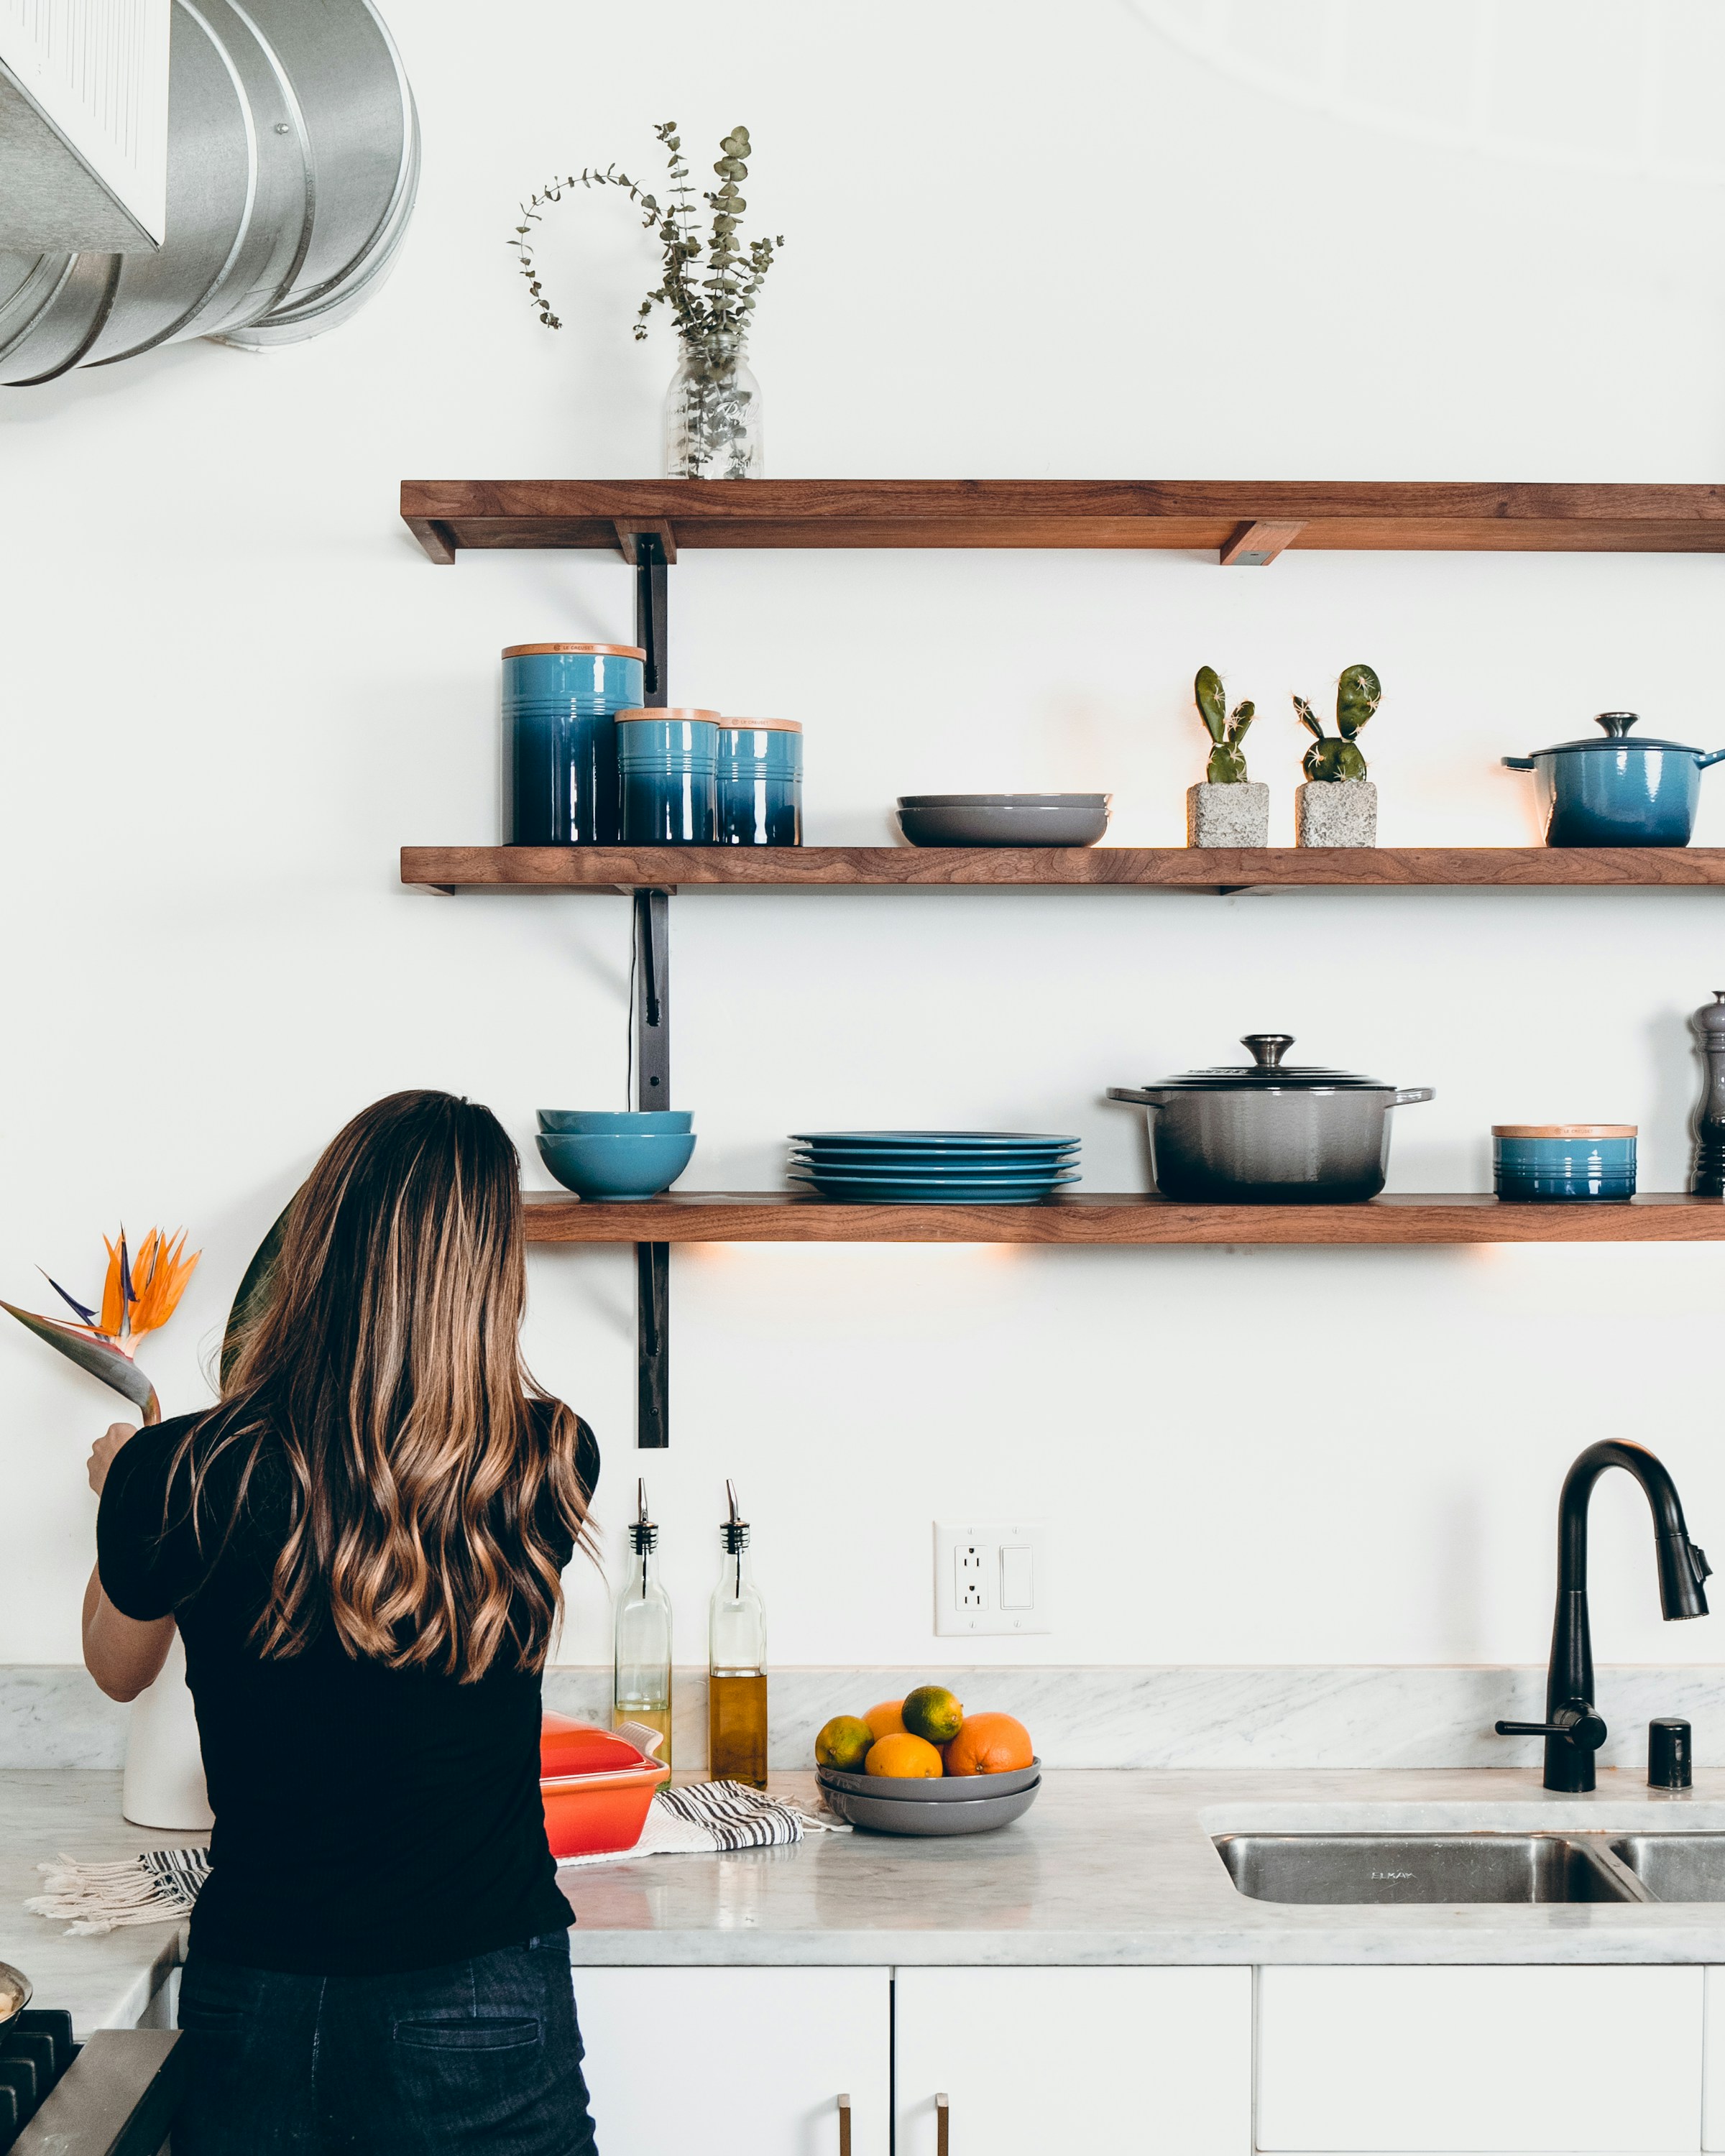 A woman standing in a kitchen | Source: Unsplash